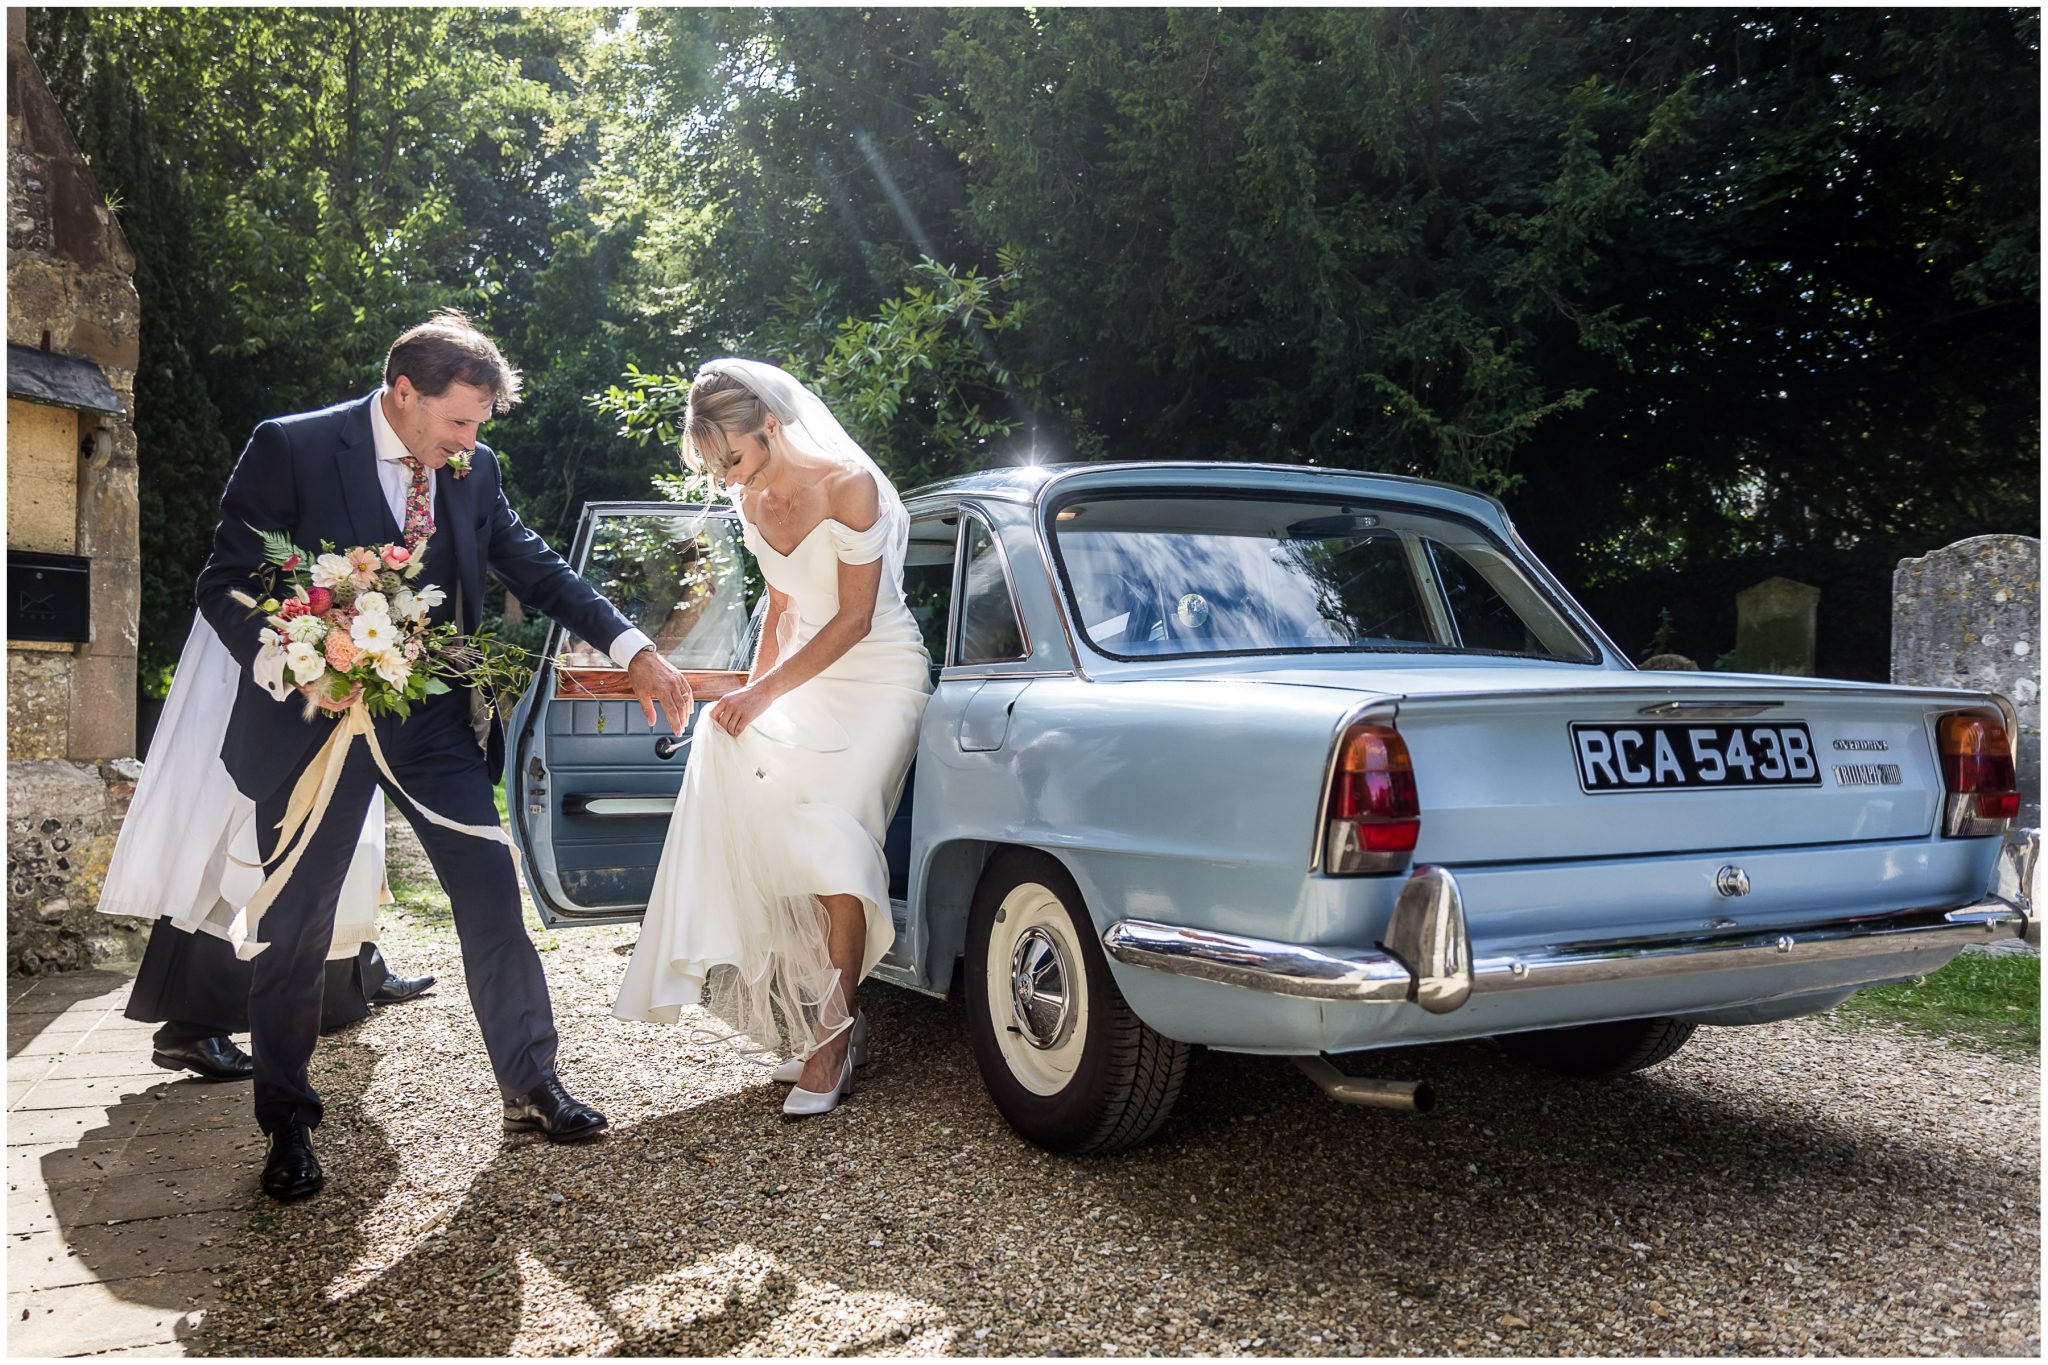 Father of the bride helps his daughter step out of the wedding car as they arrive at Droxford church